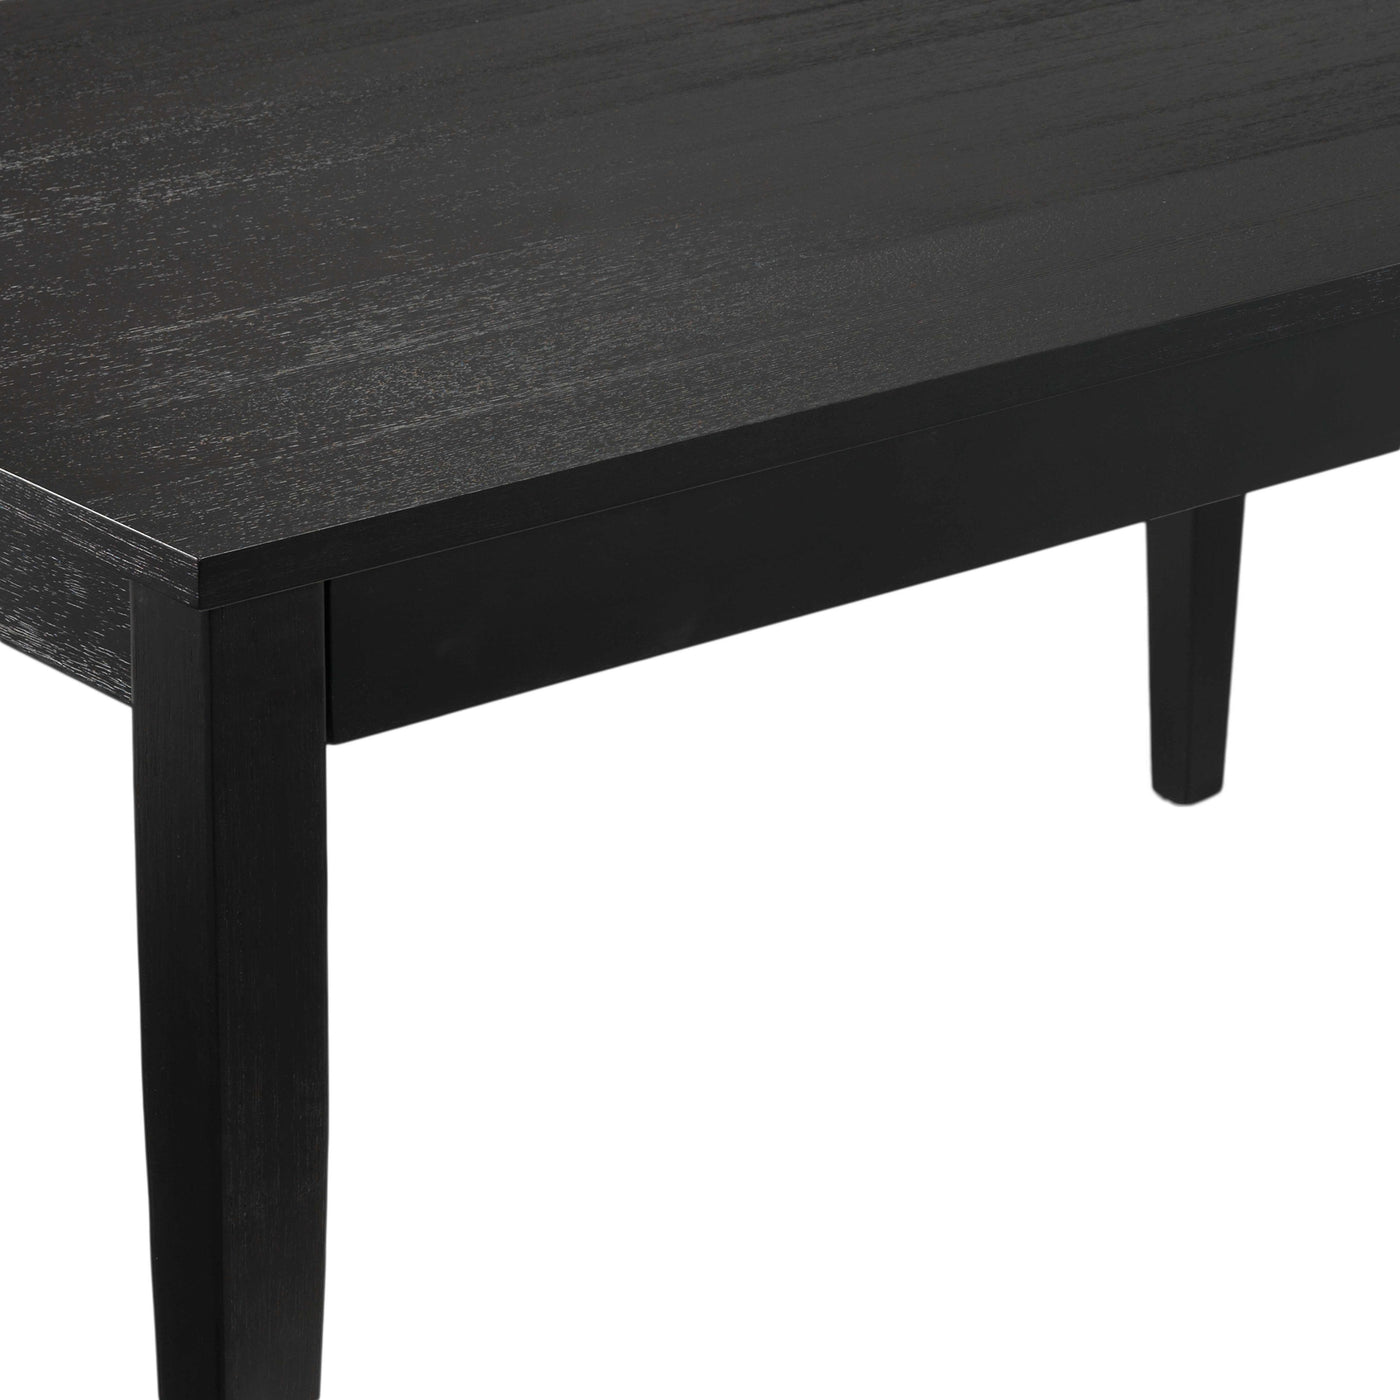 Haxby Dining Table - Weathered Grey